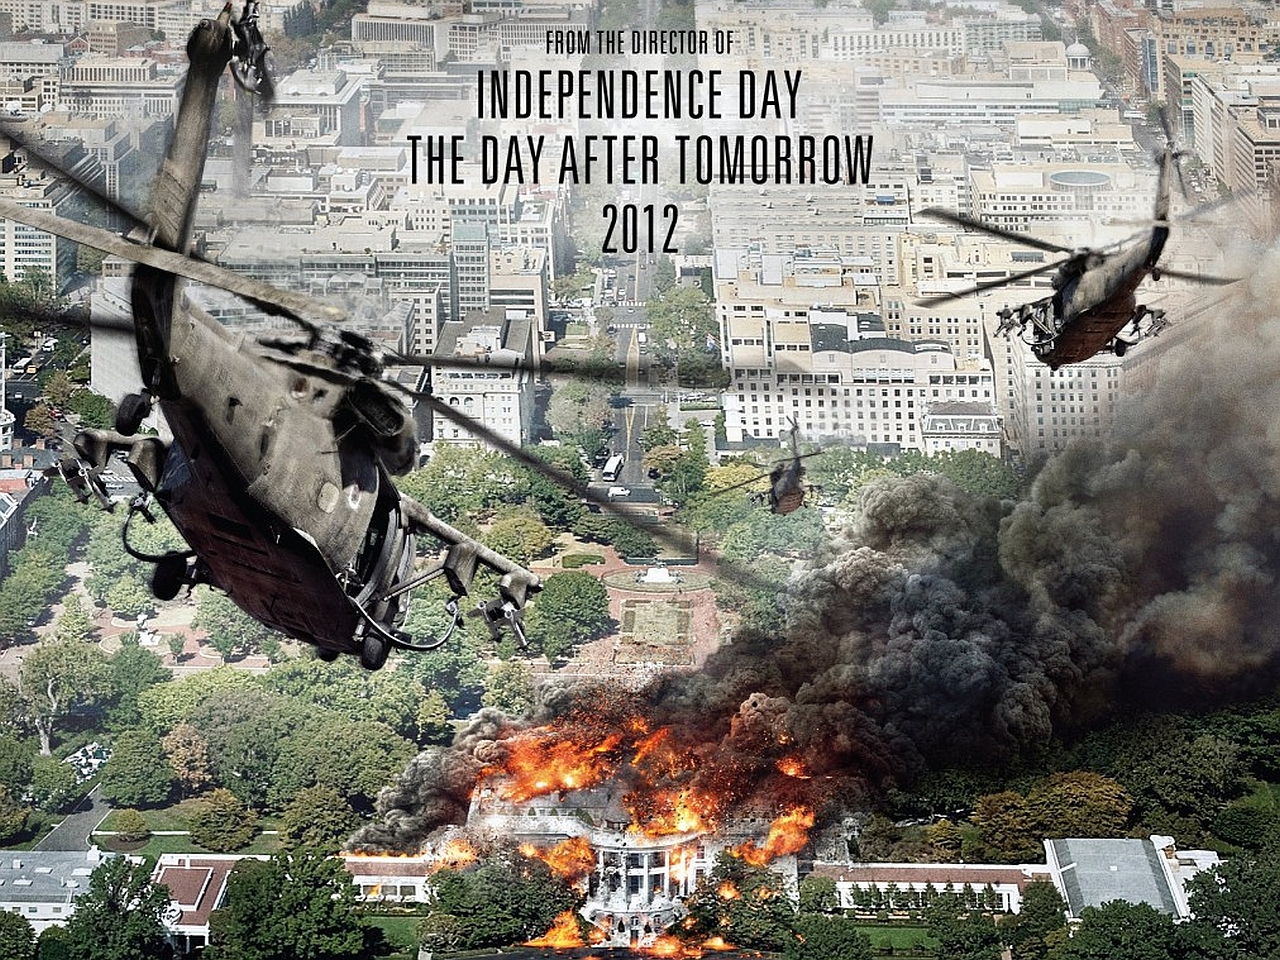 White House Down Computer Wallpapers Desktop Backgrounds 1280x960 1280x960